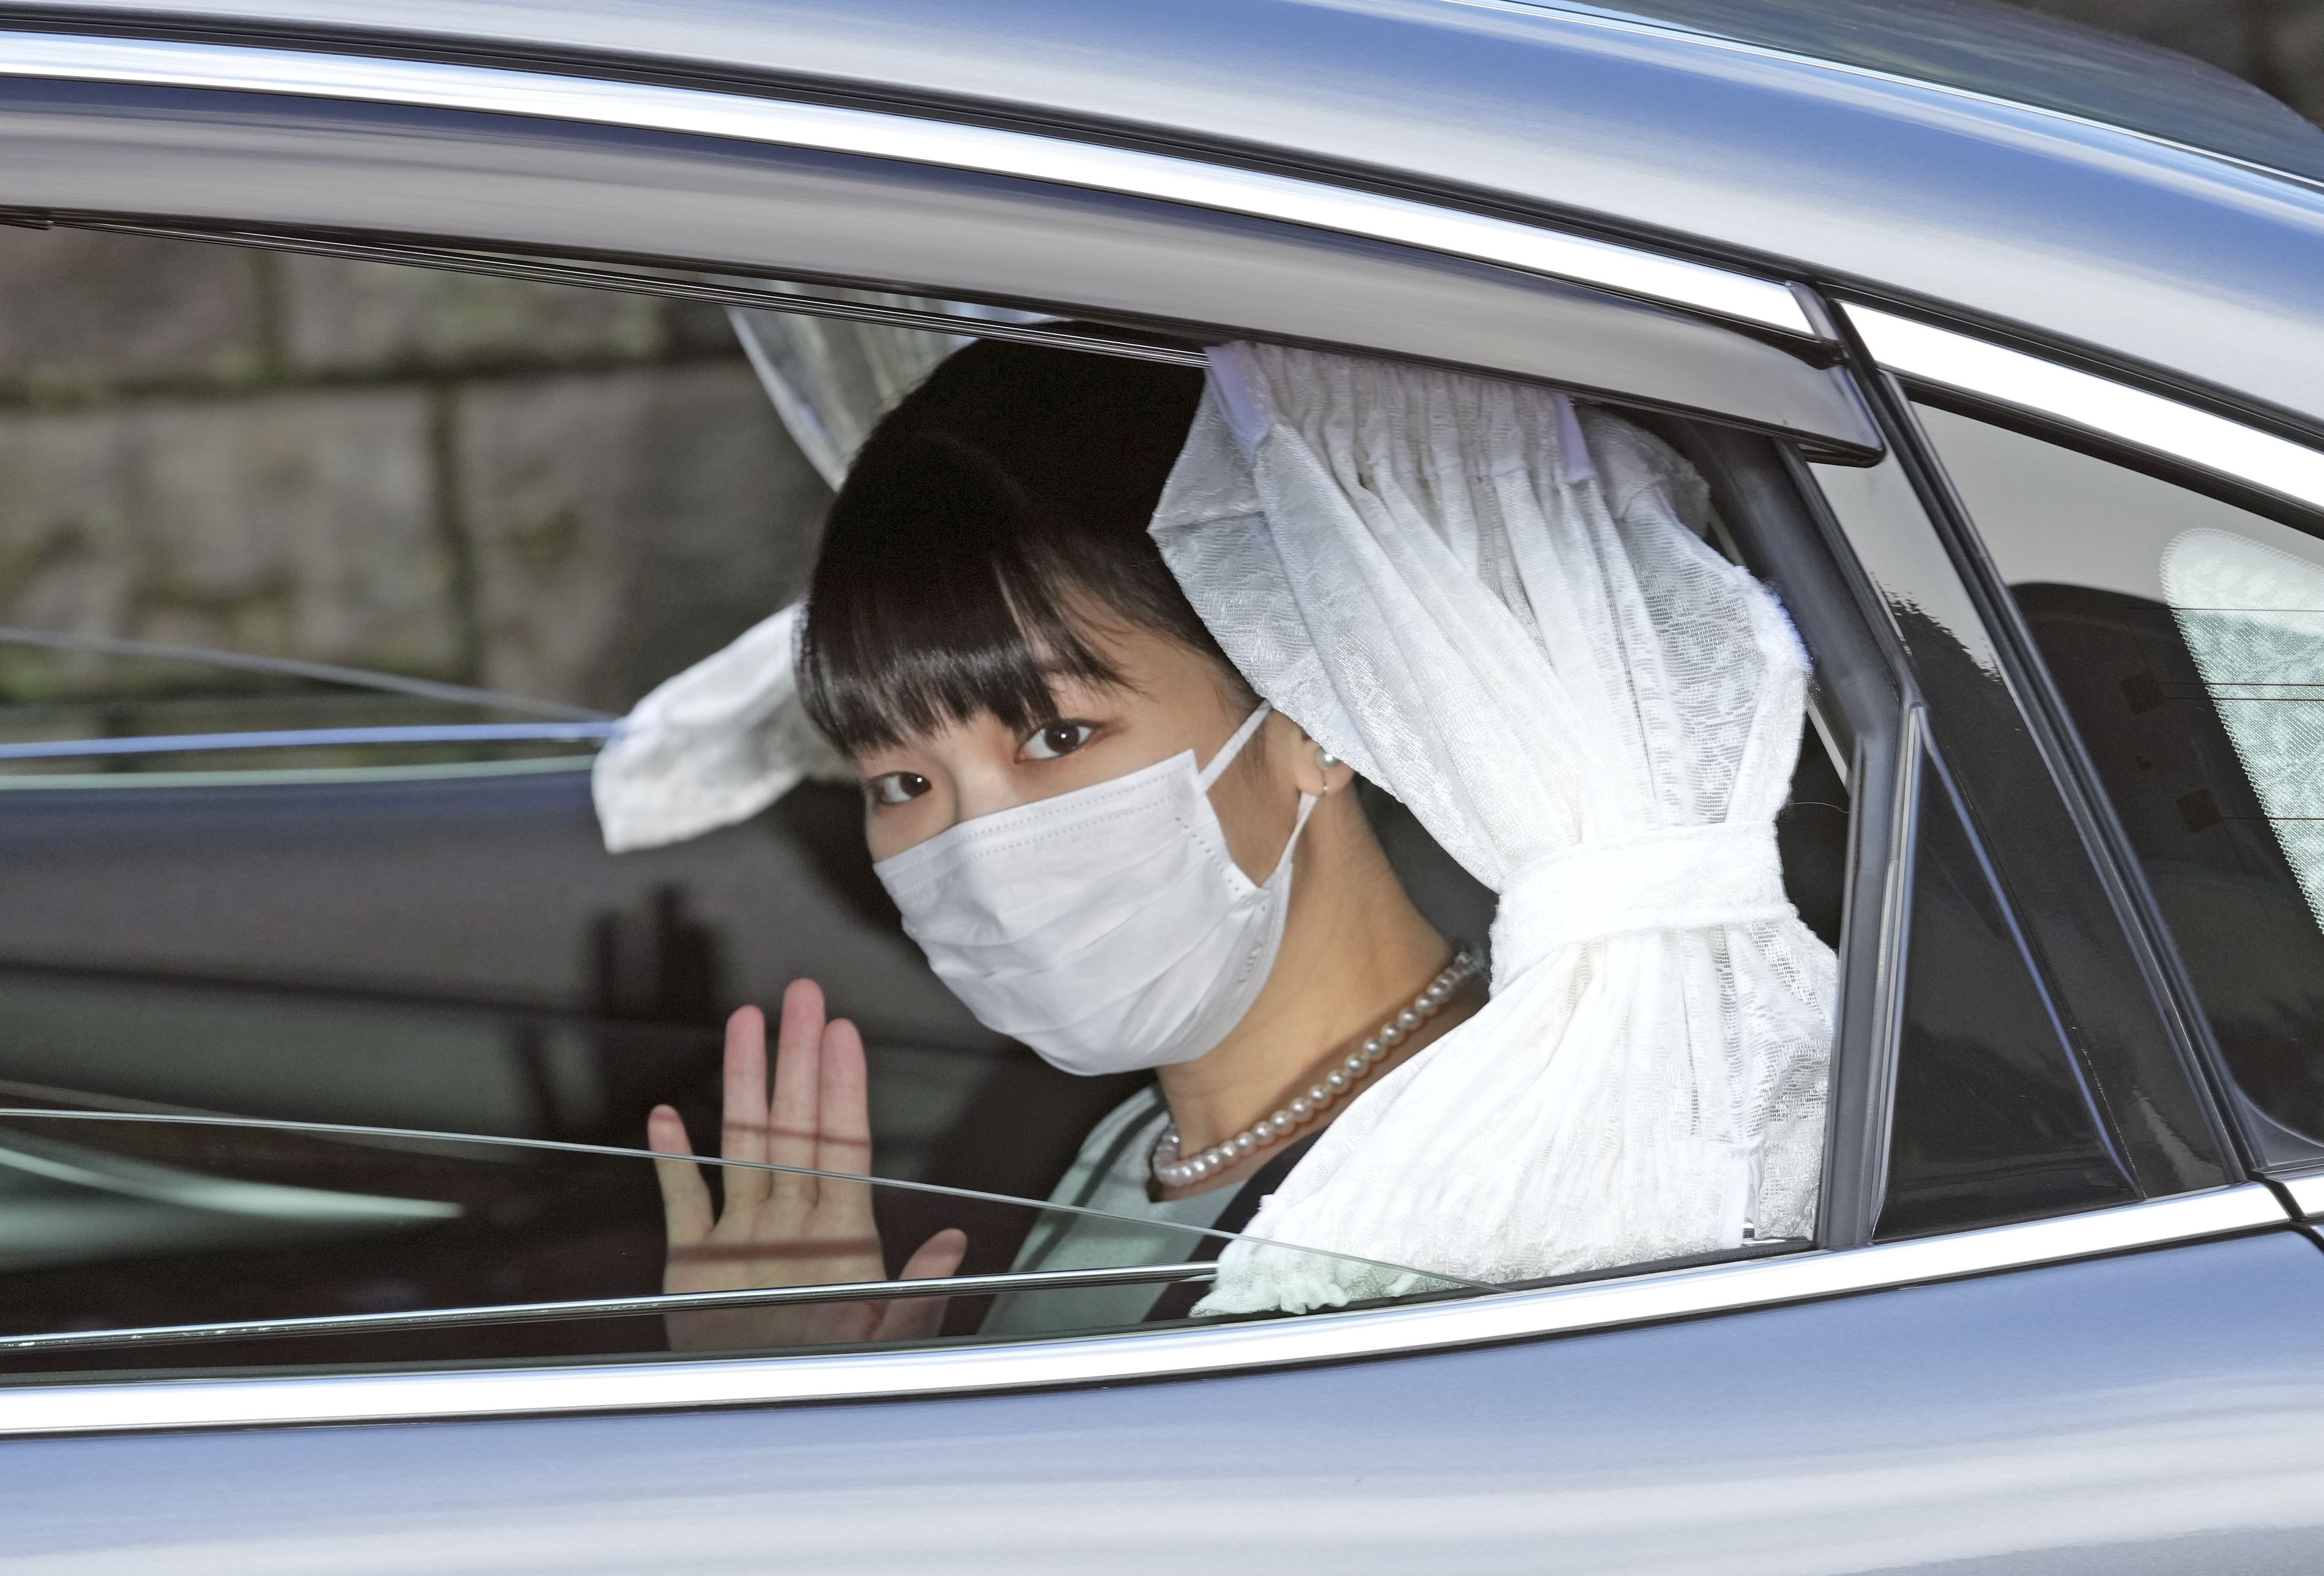 Japan's Princess Mako waves from inside a car as she leaves her home for her marriage at Akasaka Estate in Tokyo, Japan October 26, 2021 in this photo taken by Kyodo. Kyodo/via REUTERS